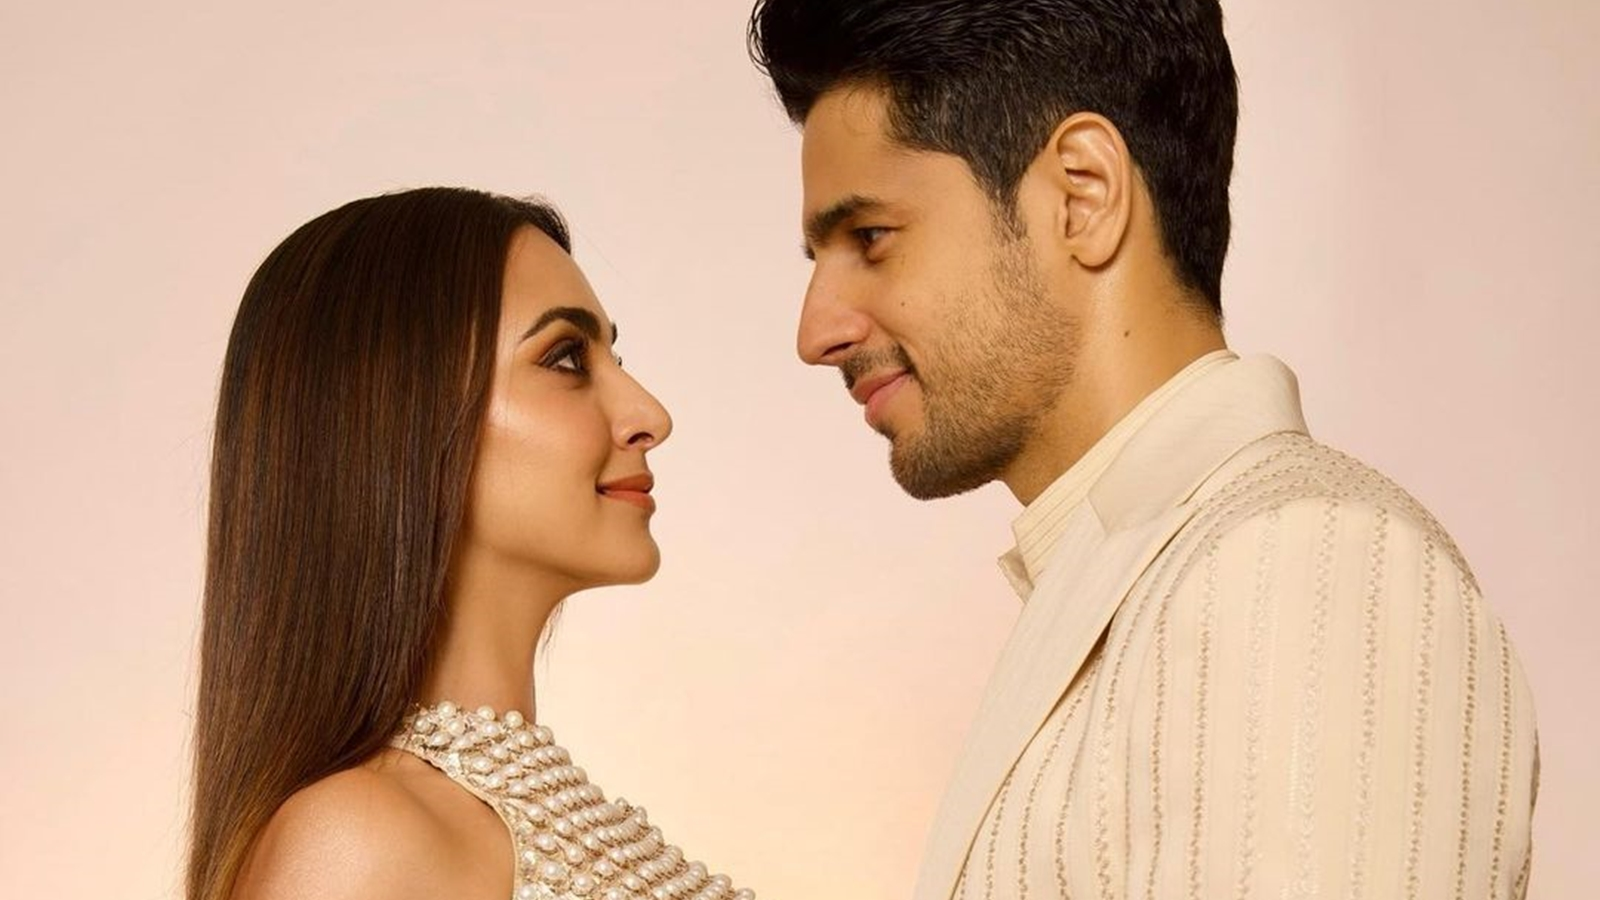 Sidharth Malhotra on how his life changed after marrying Kiara